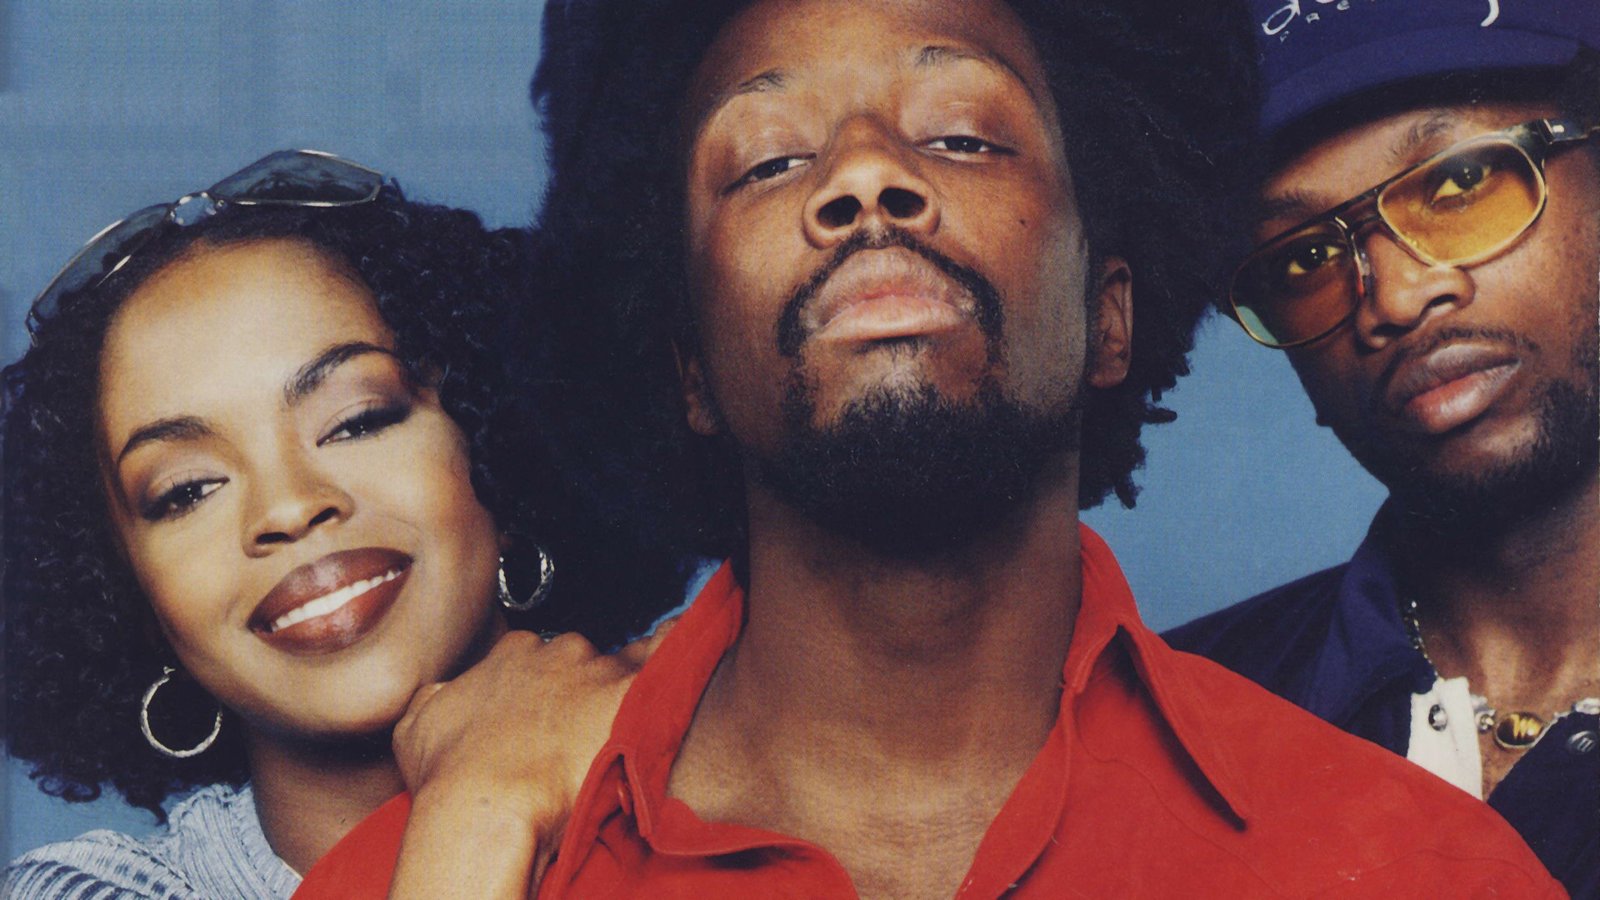 20 years later and The Fugees' 'The Score' is still relevant